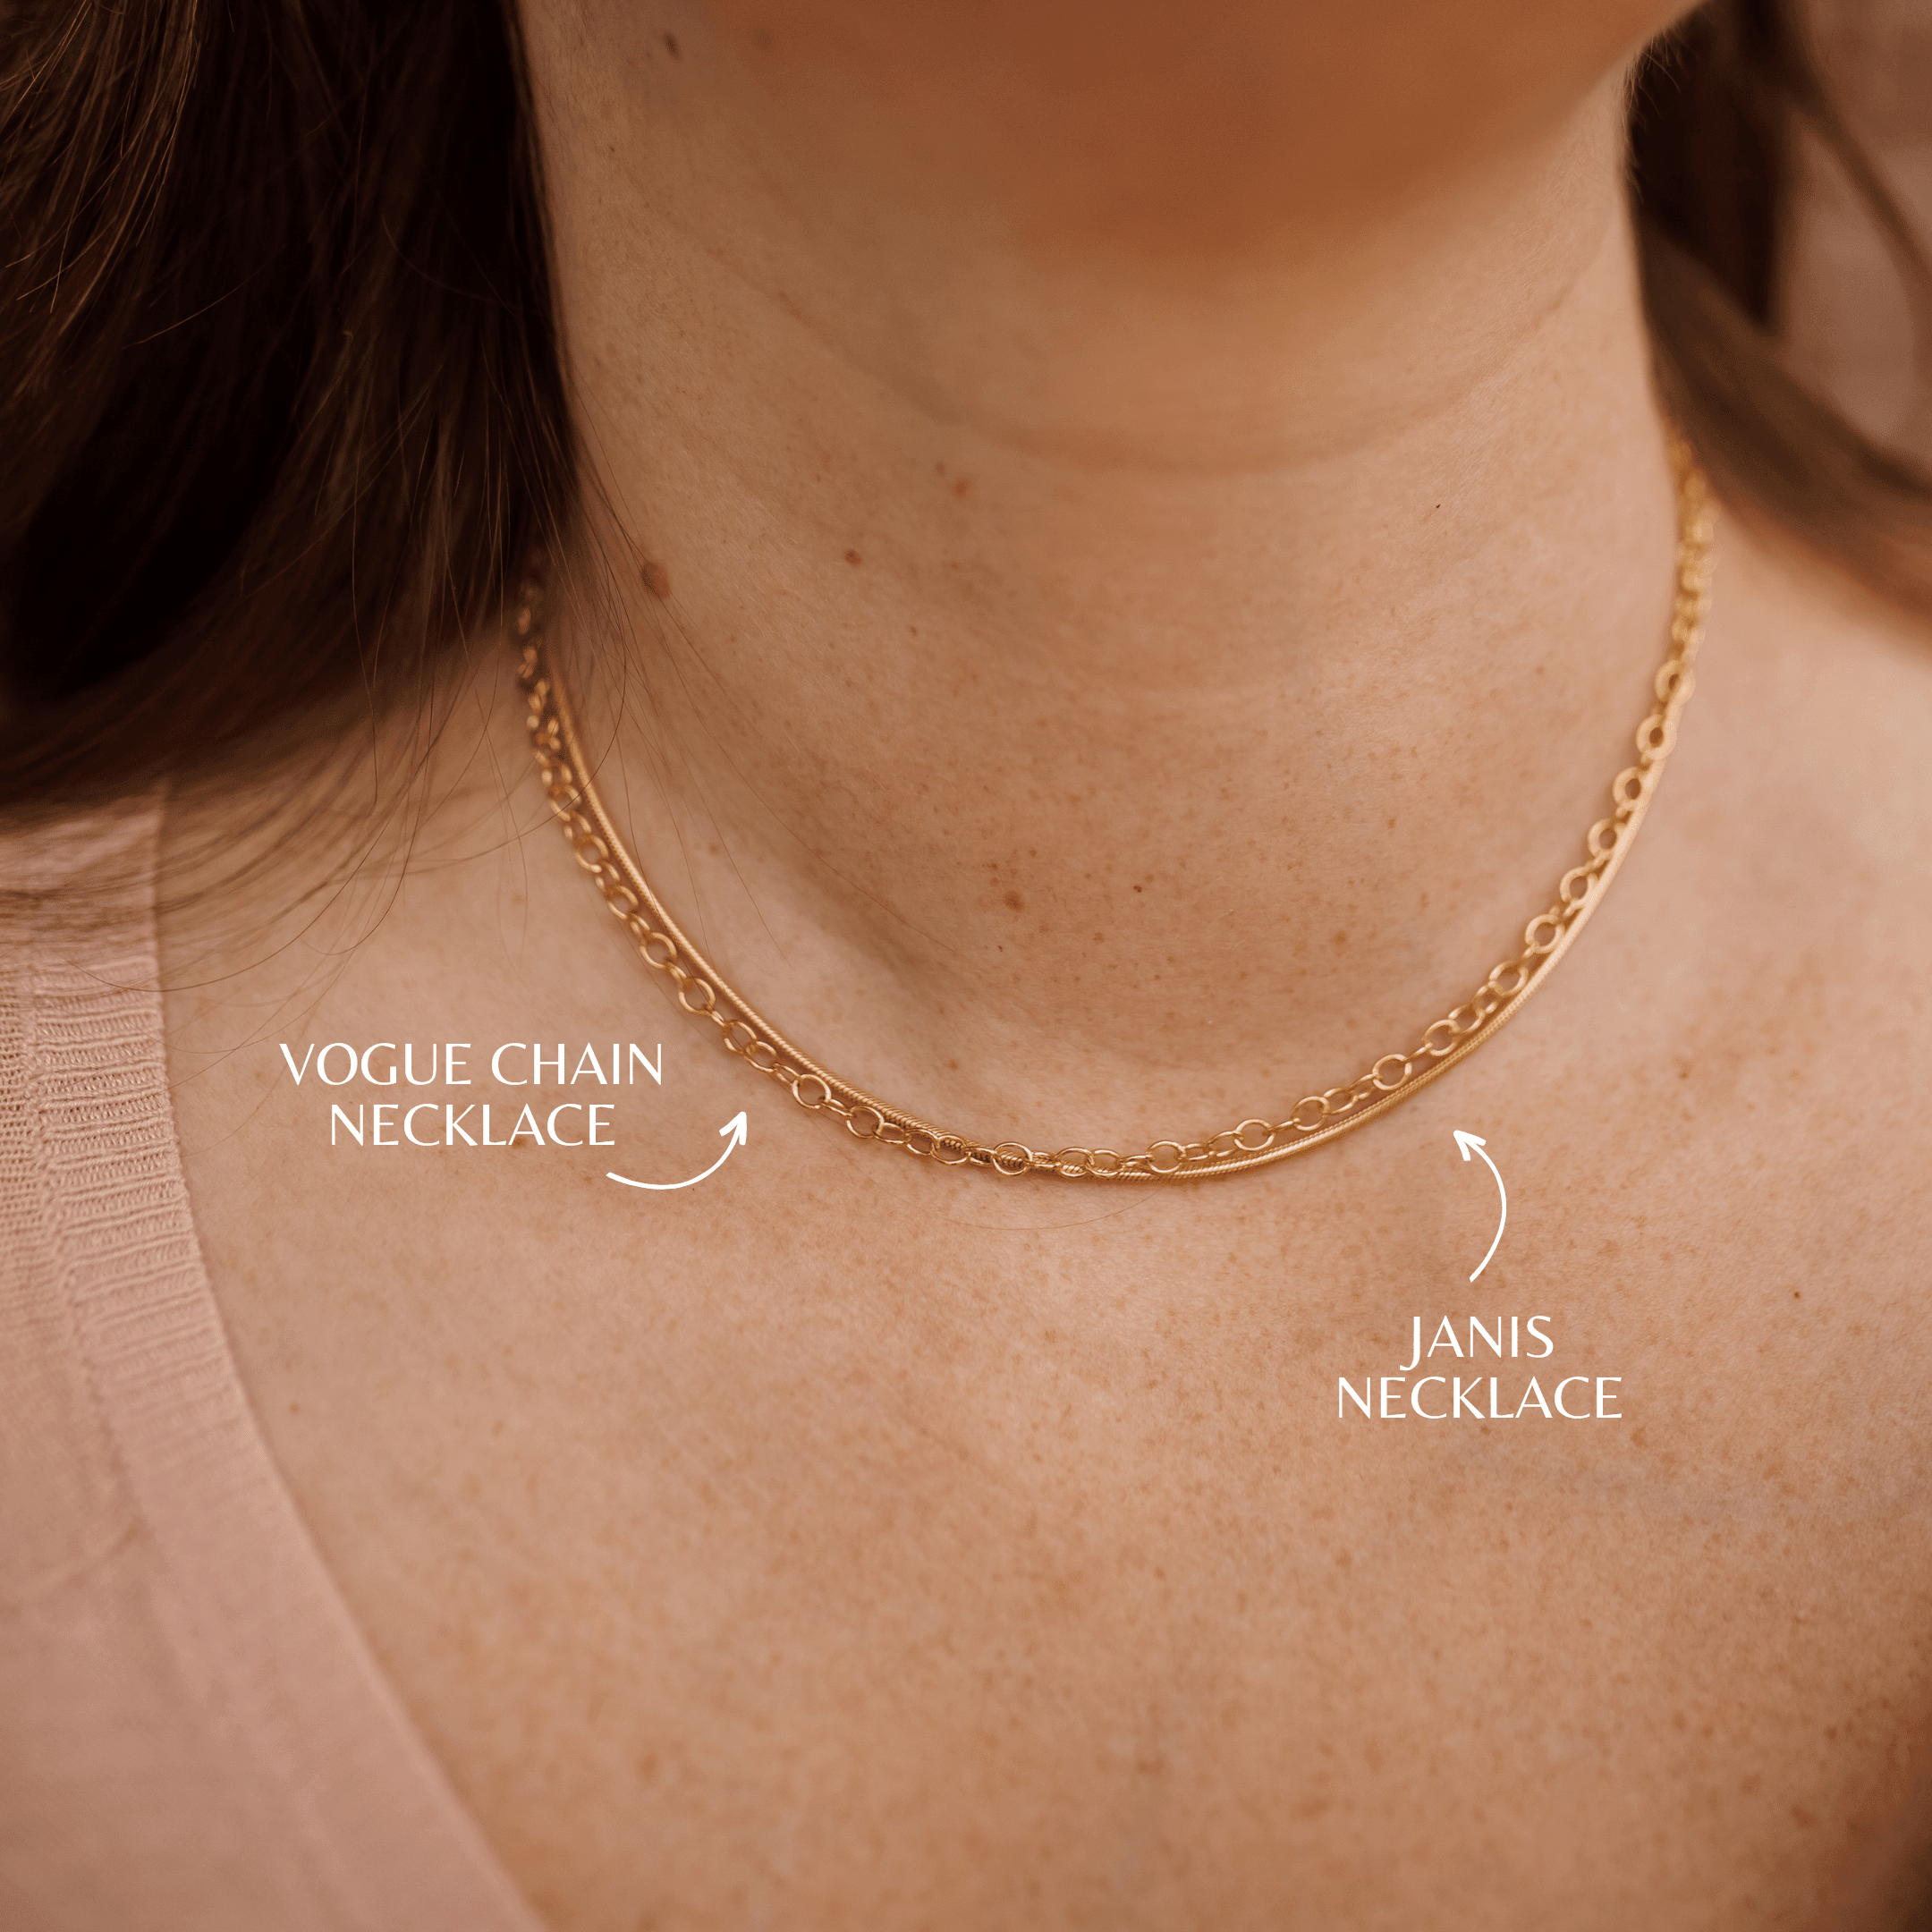 Vogue Chain Necklace - Nolia Jewelry - Meaningful + Sustainably Handcrafted Jewelry